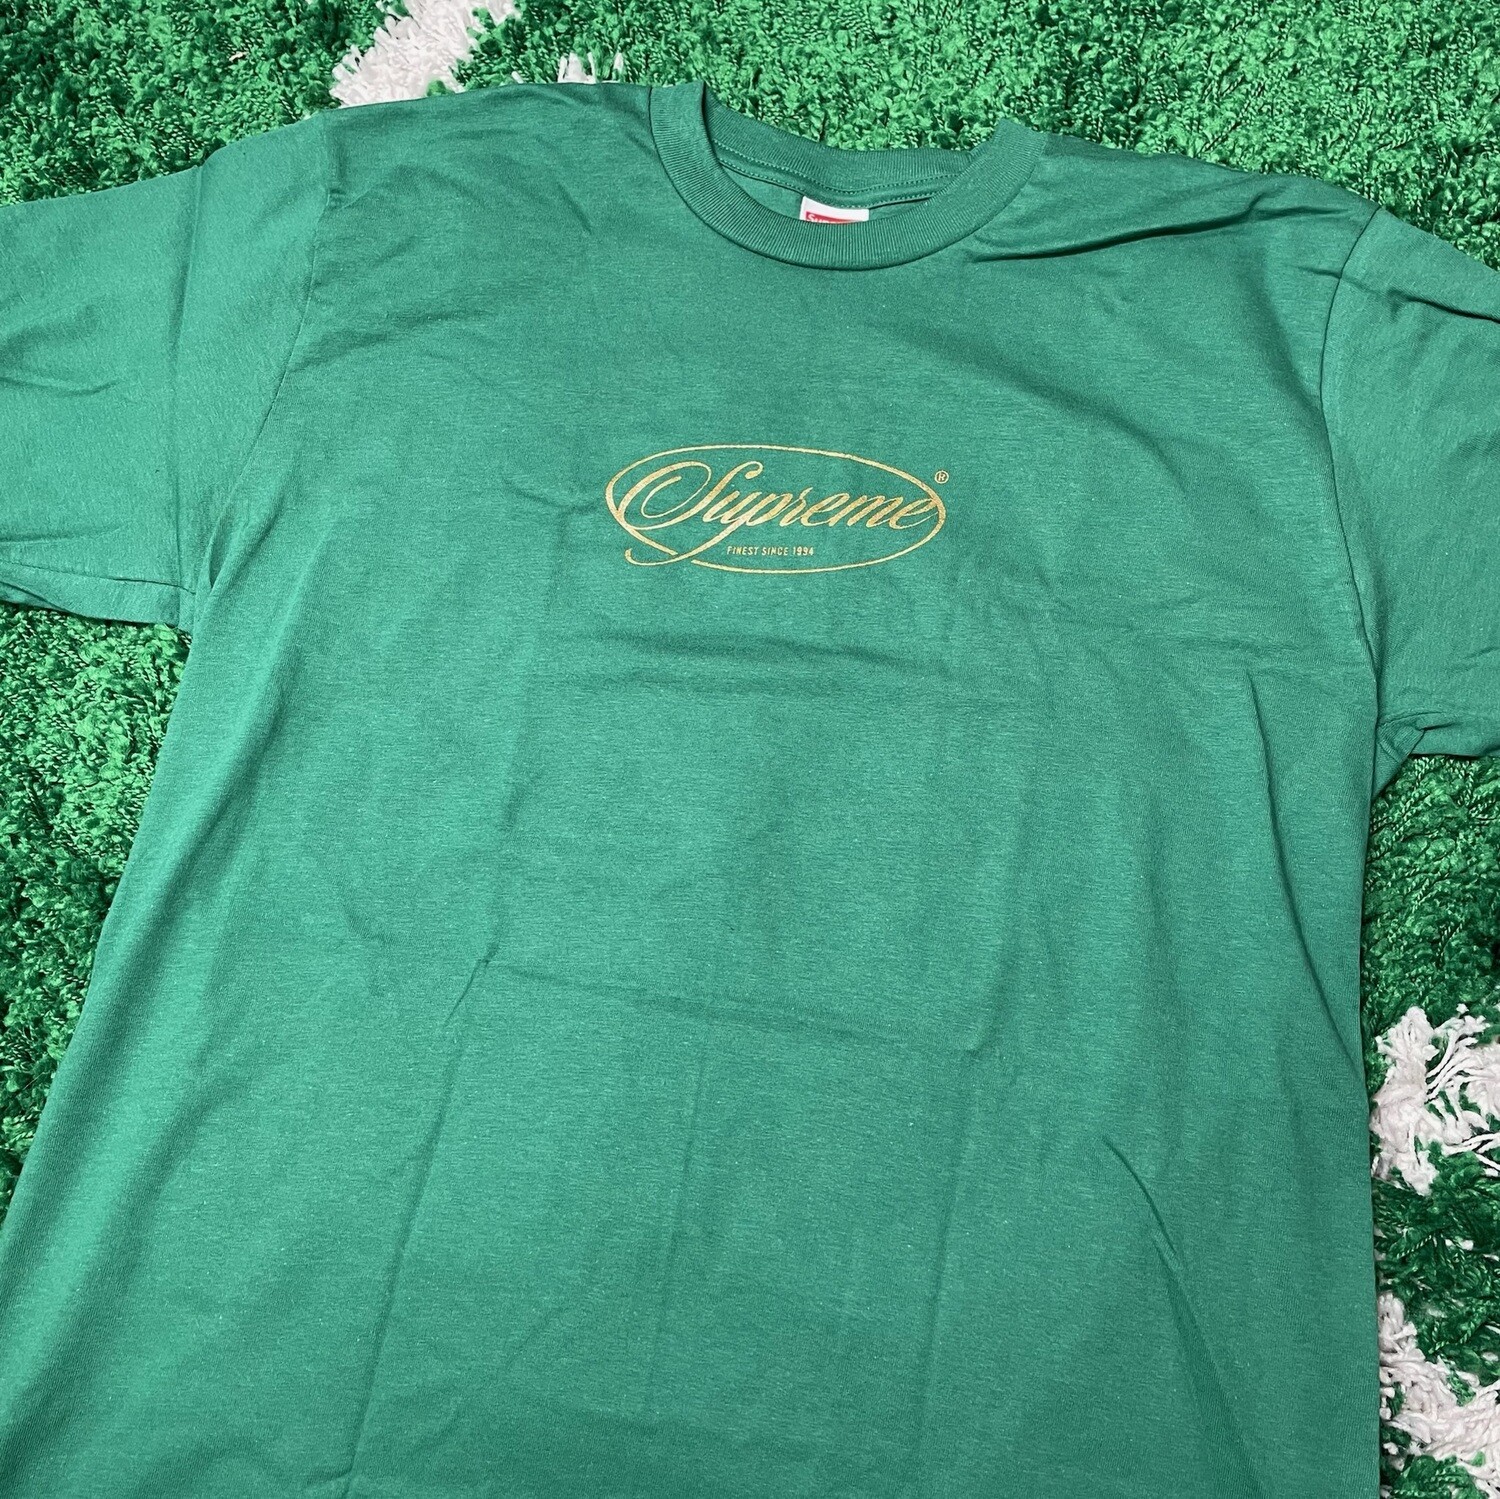 Supreme finest since 1994 Green Size Large